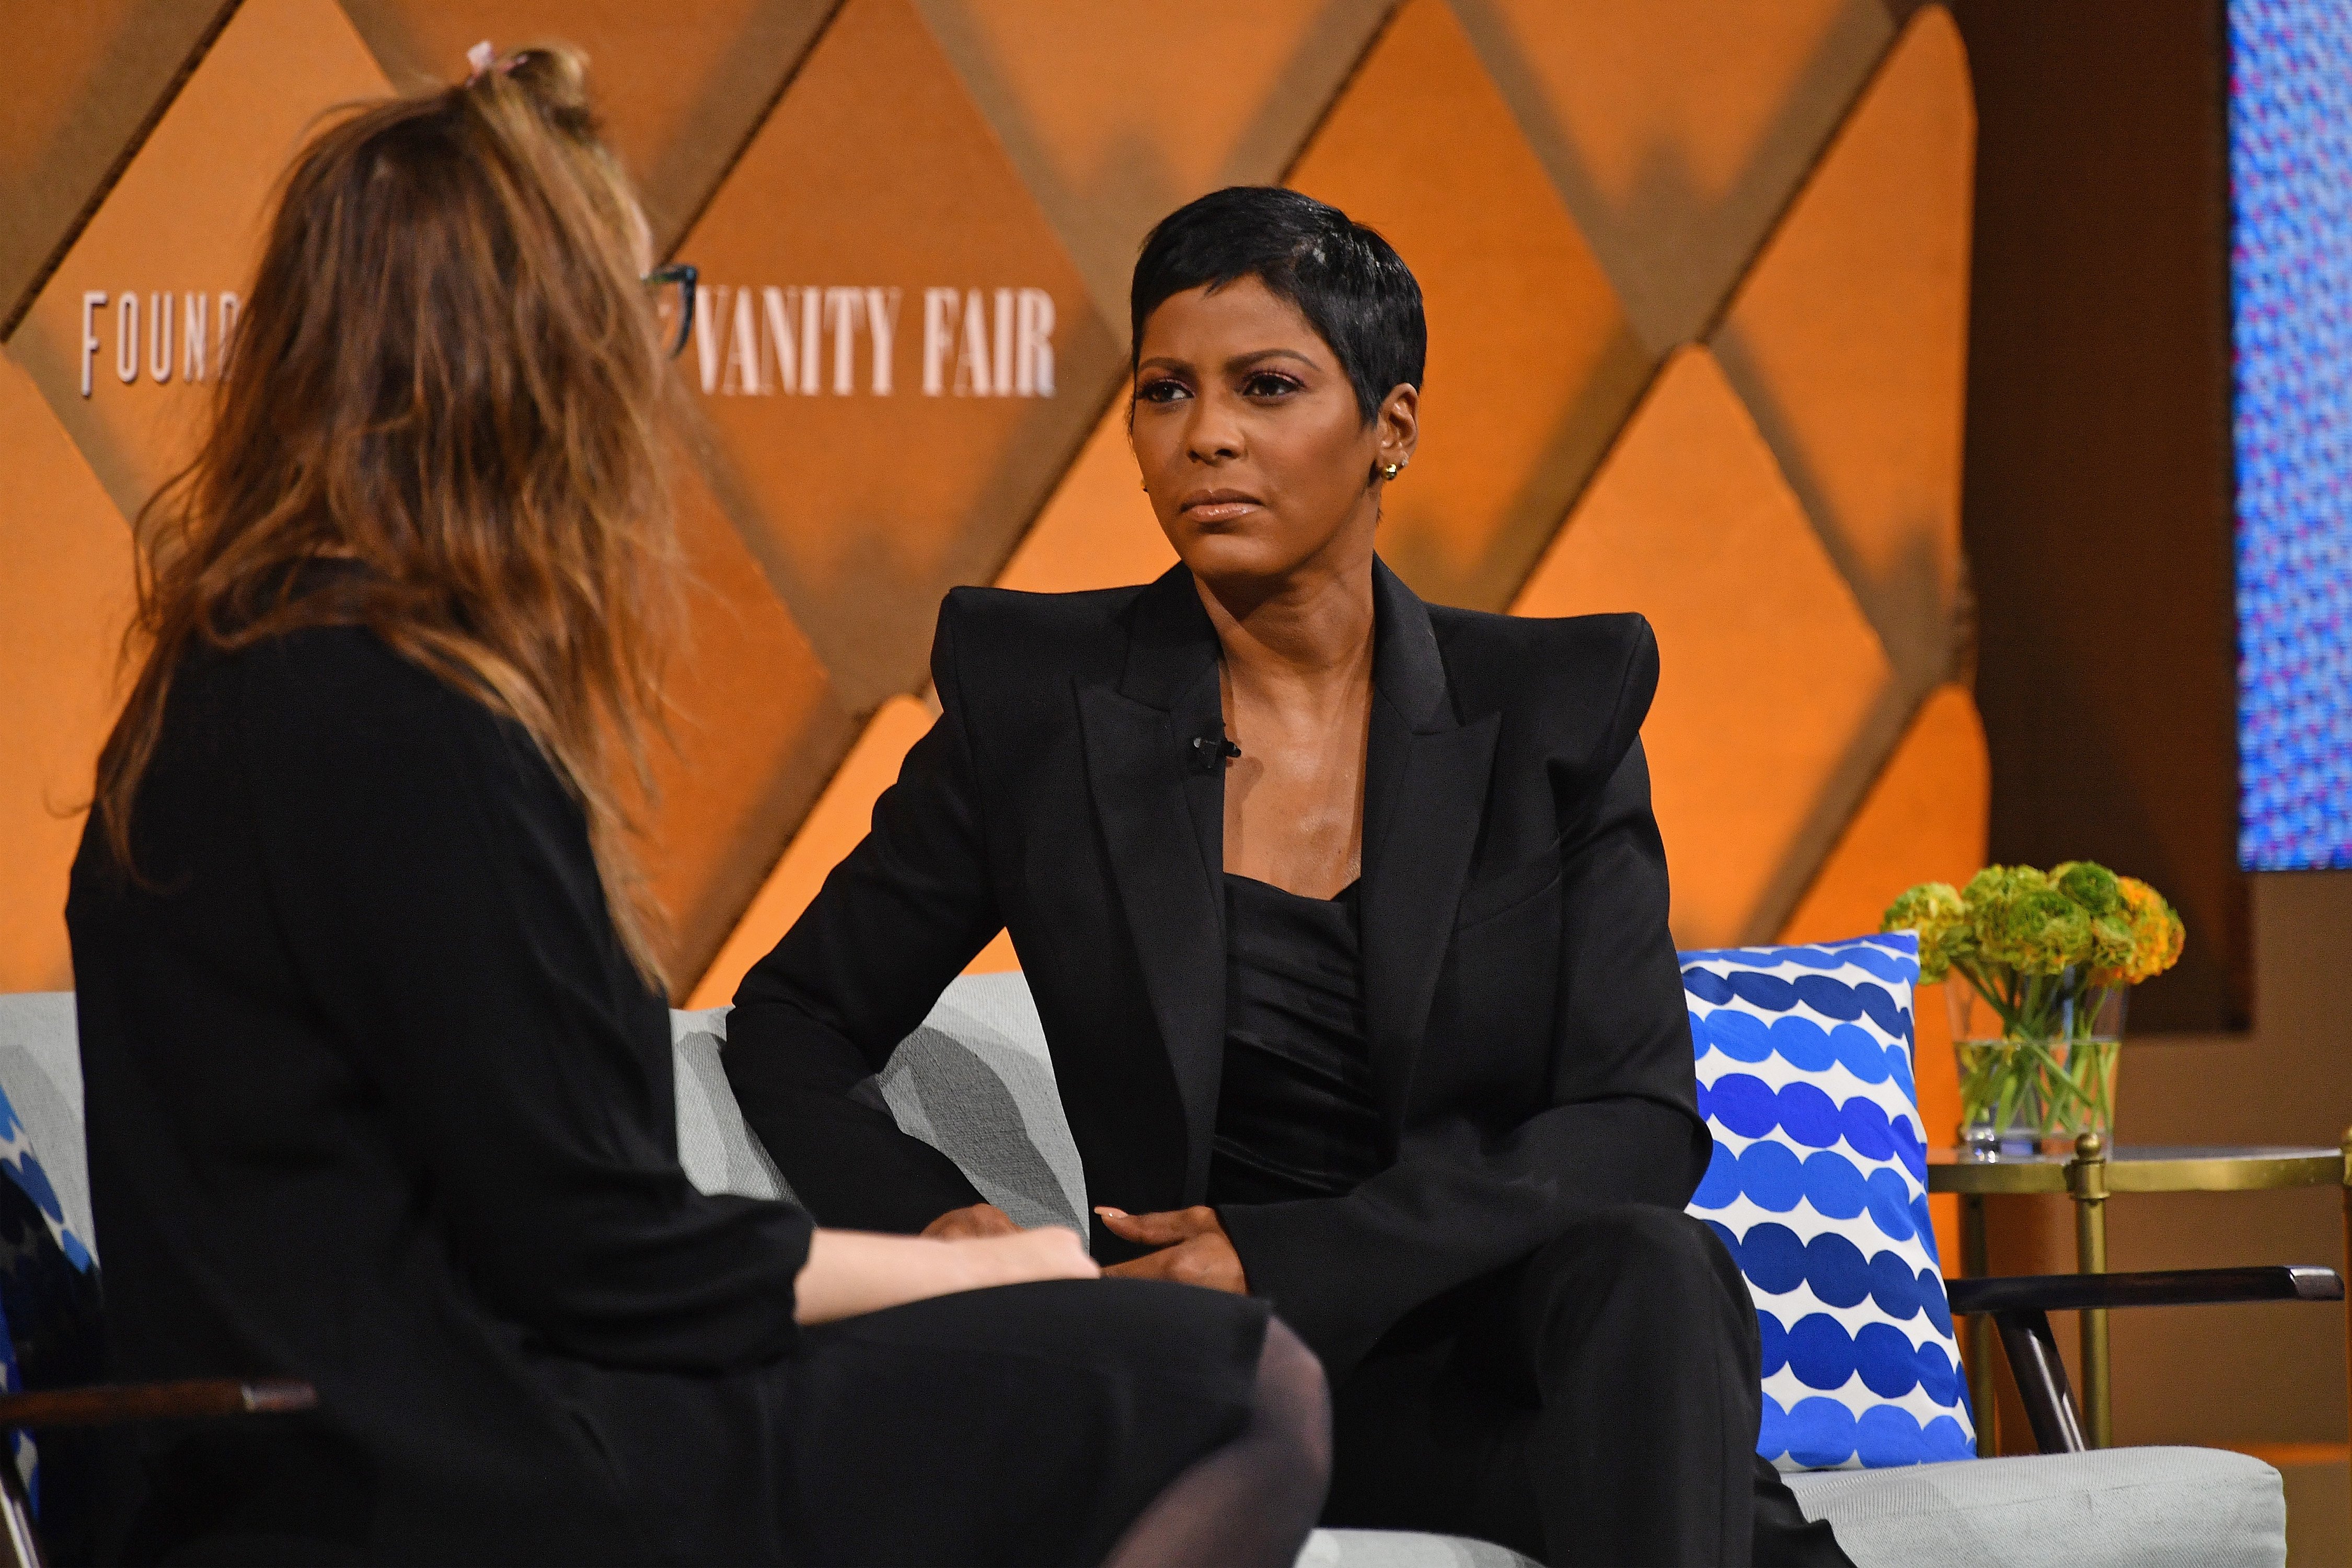  Tamron Hall (R) speaks to The Player's Tribune president and co-founder Jaymee Messler onstage during Vanity Fair's Founders Fair at Spring Studios on April 12, 2018 in New York City.  | Photo: GettyImages